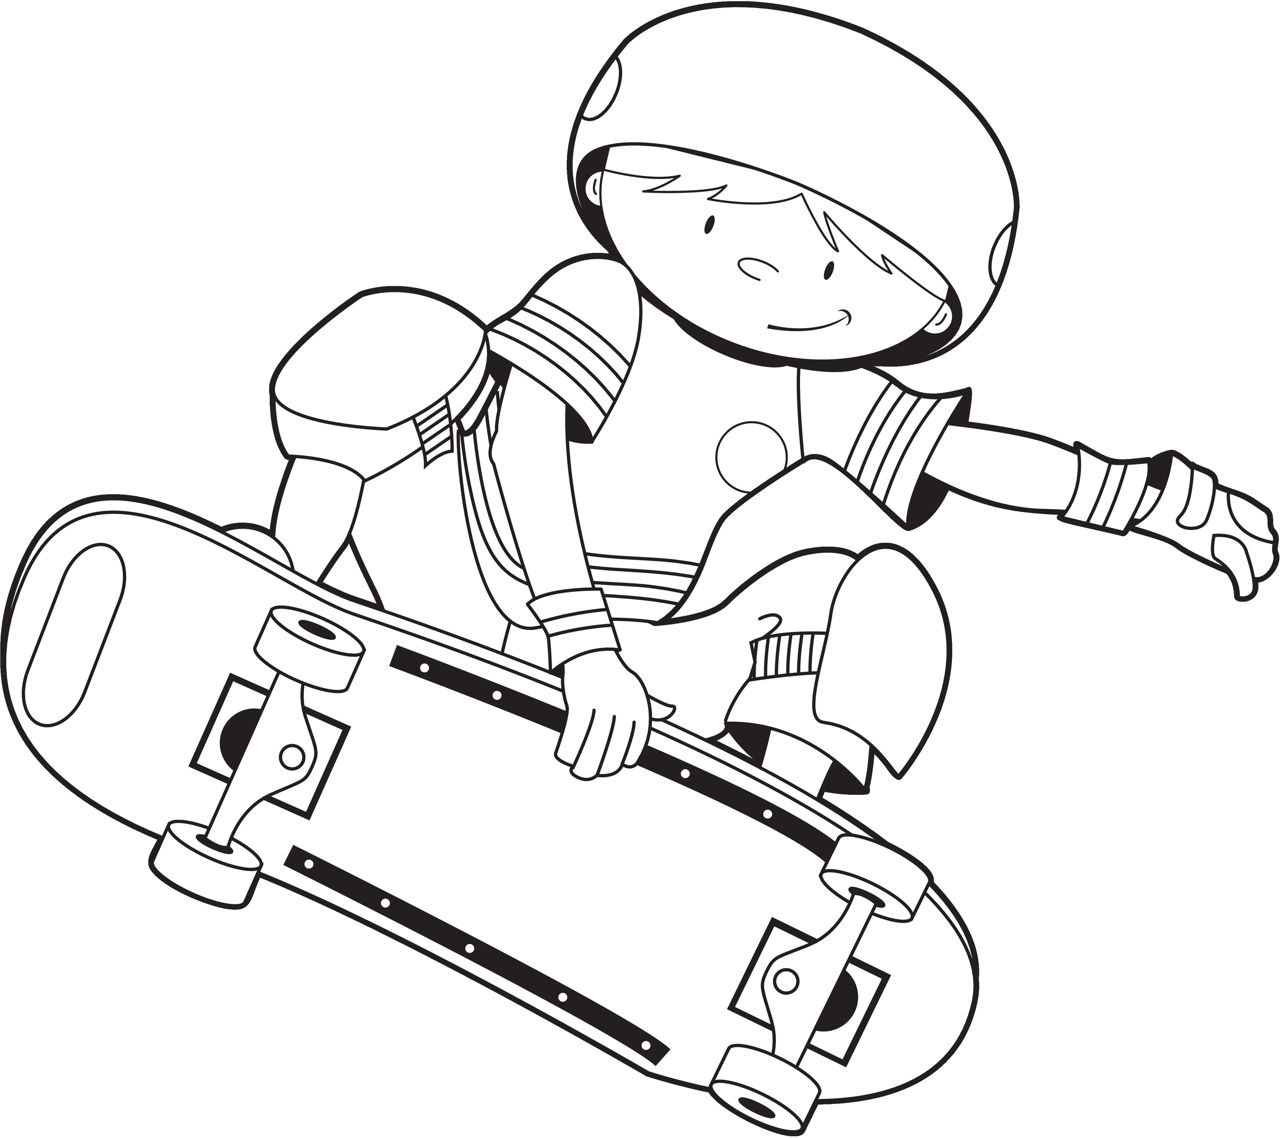 Cool Boys Coloring Pages
 10 Cool Coloring Pages for Boys to Print Out For Free